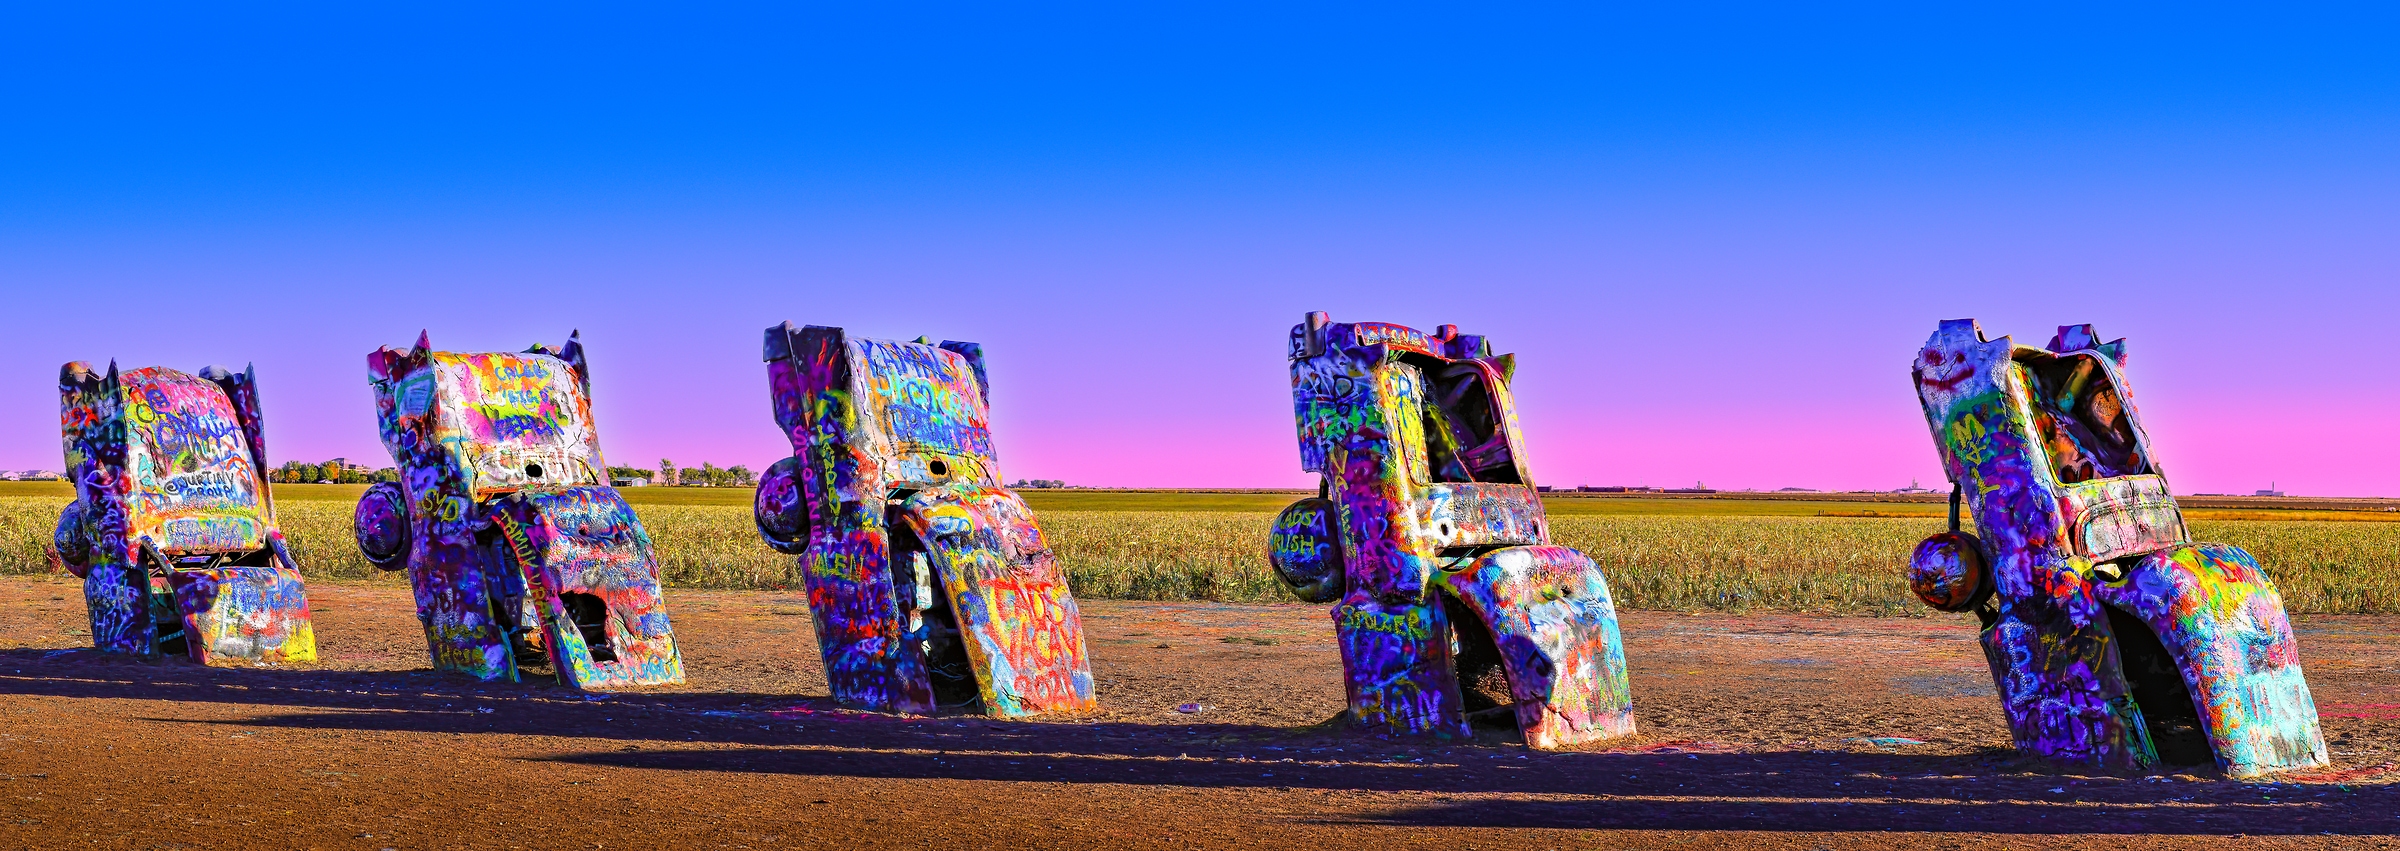 155 megapixels! A very high resolution, large-format VAST photo print of an art installation of old cars buried in the ground; photograph created by David David in Amarillo, Texas